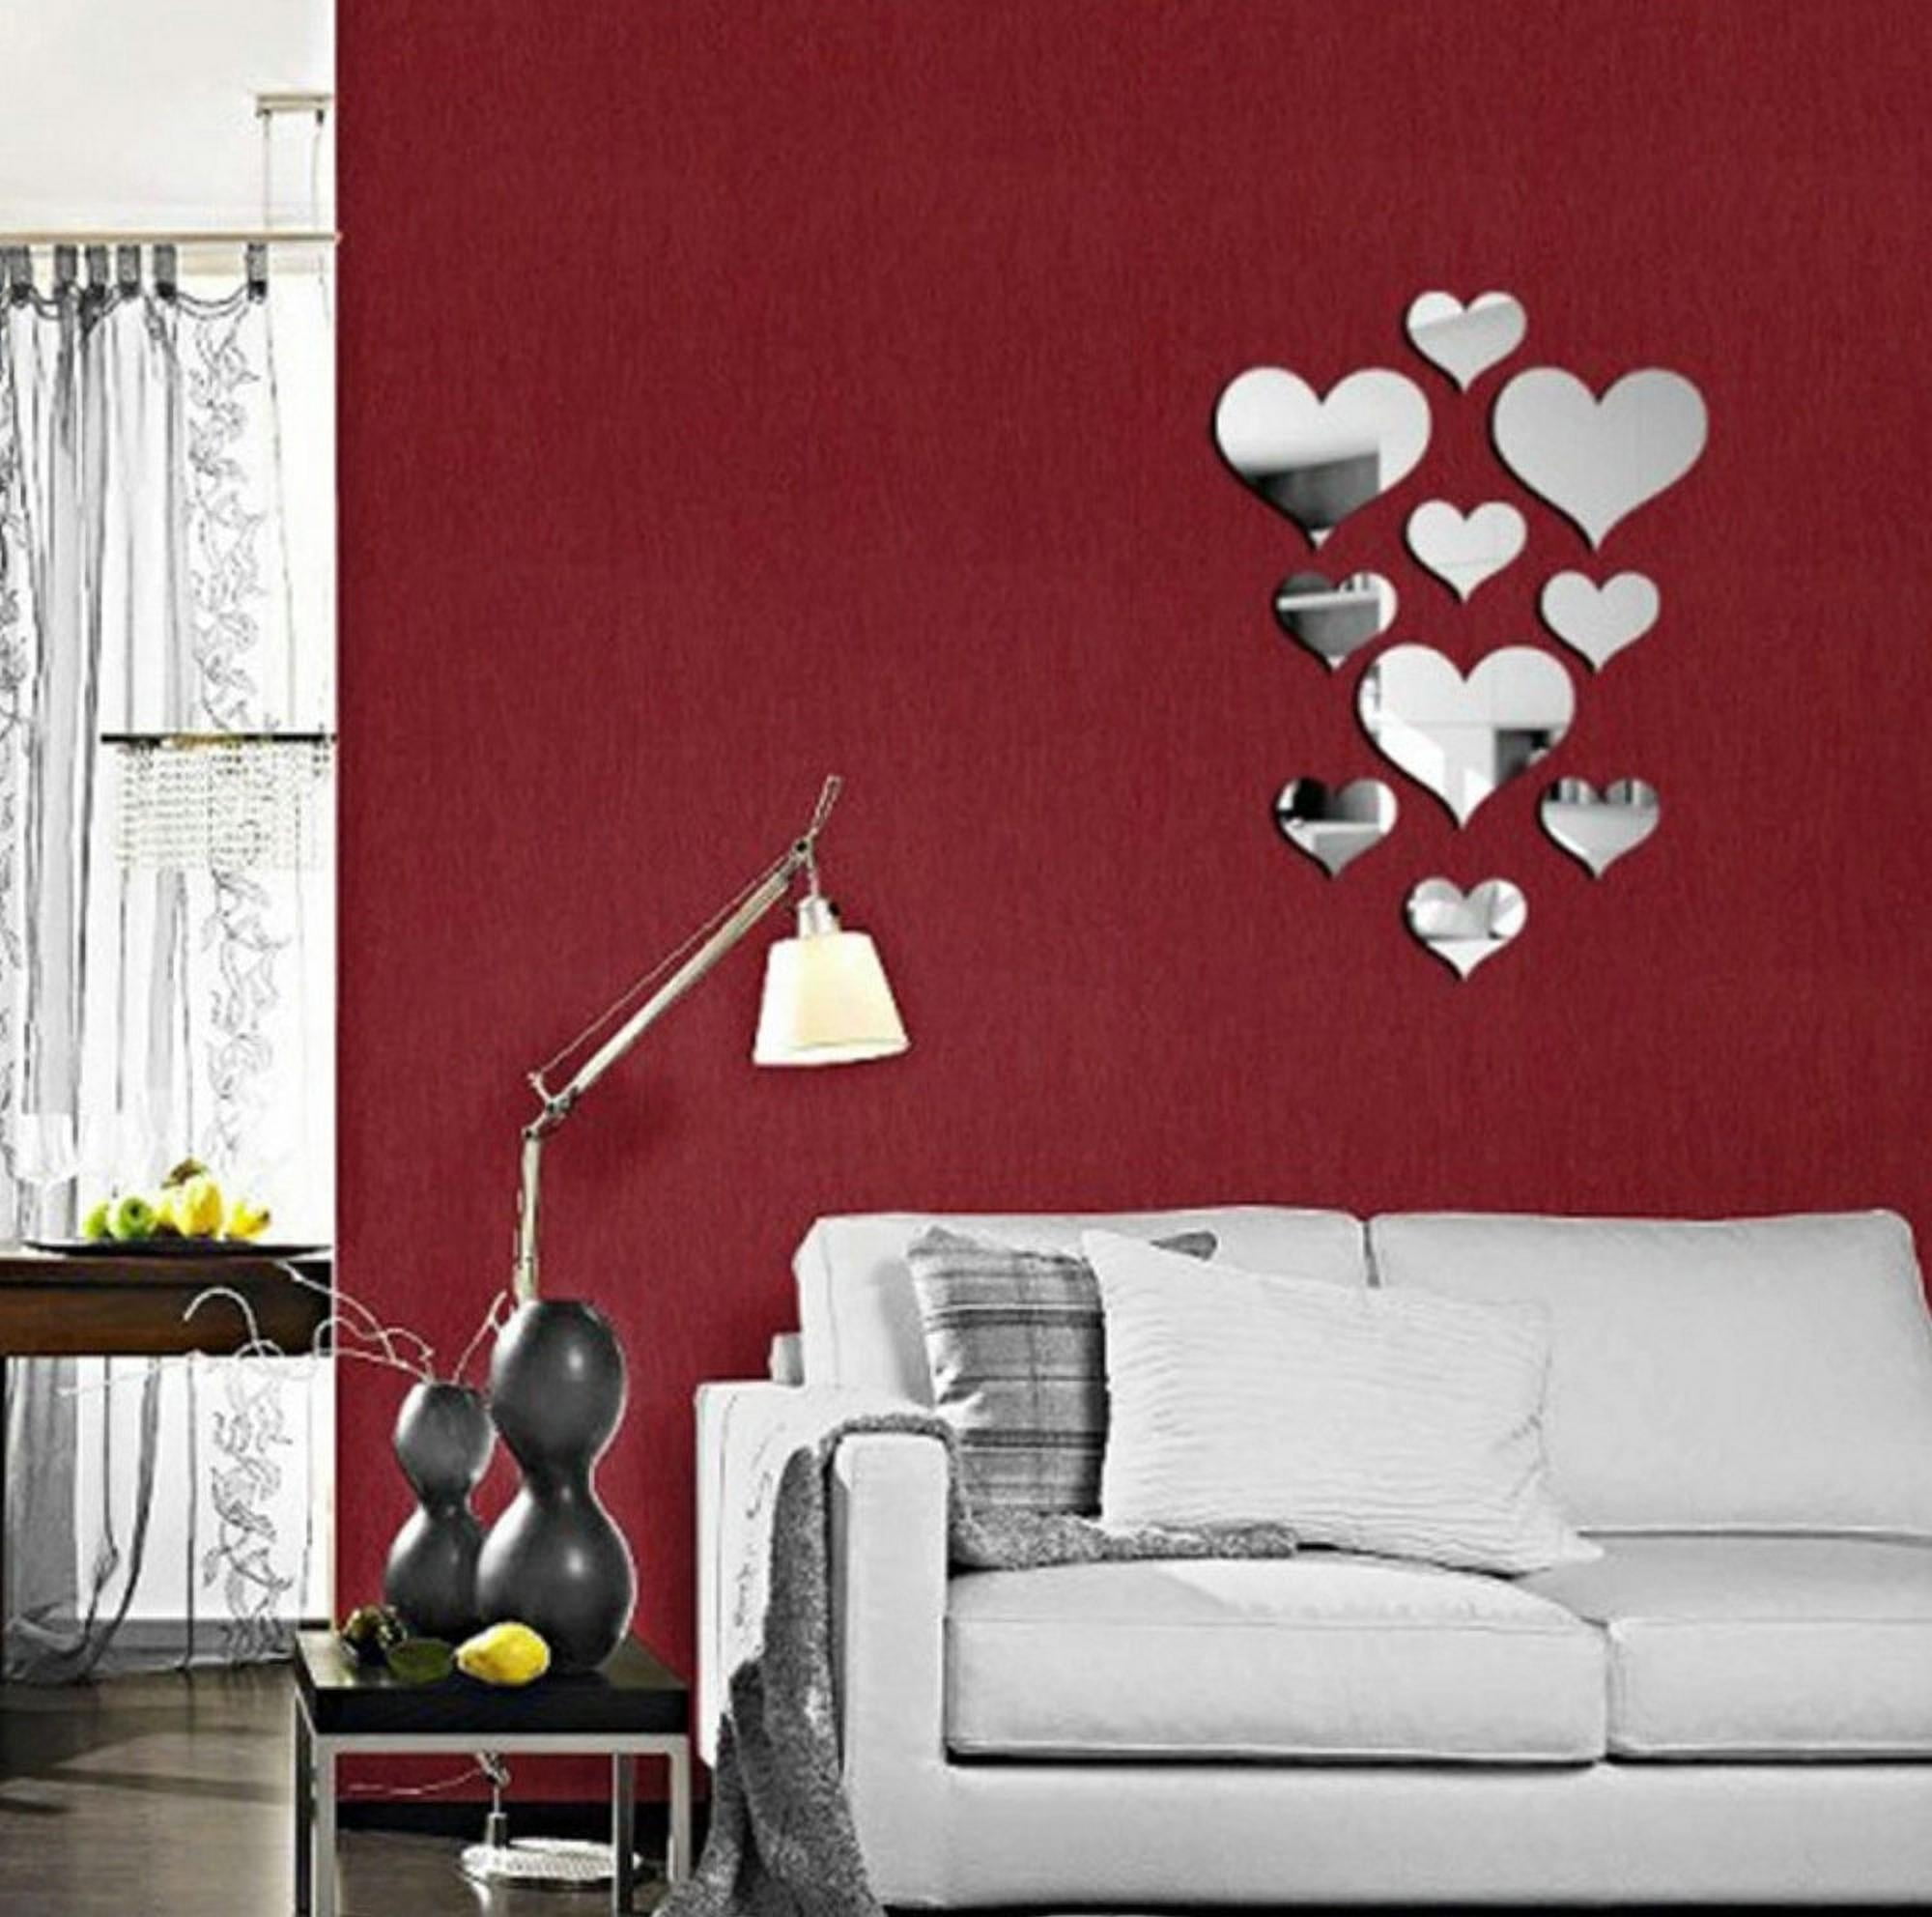 Love Hearts Pack of 40 Wall Art Vinyl Stickers Murals Decals Transfers 